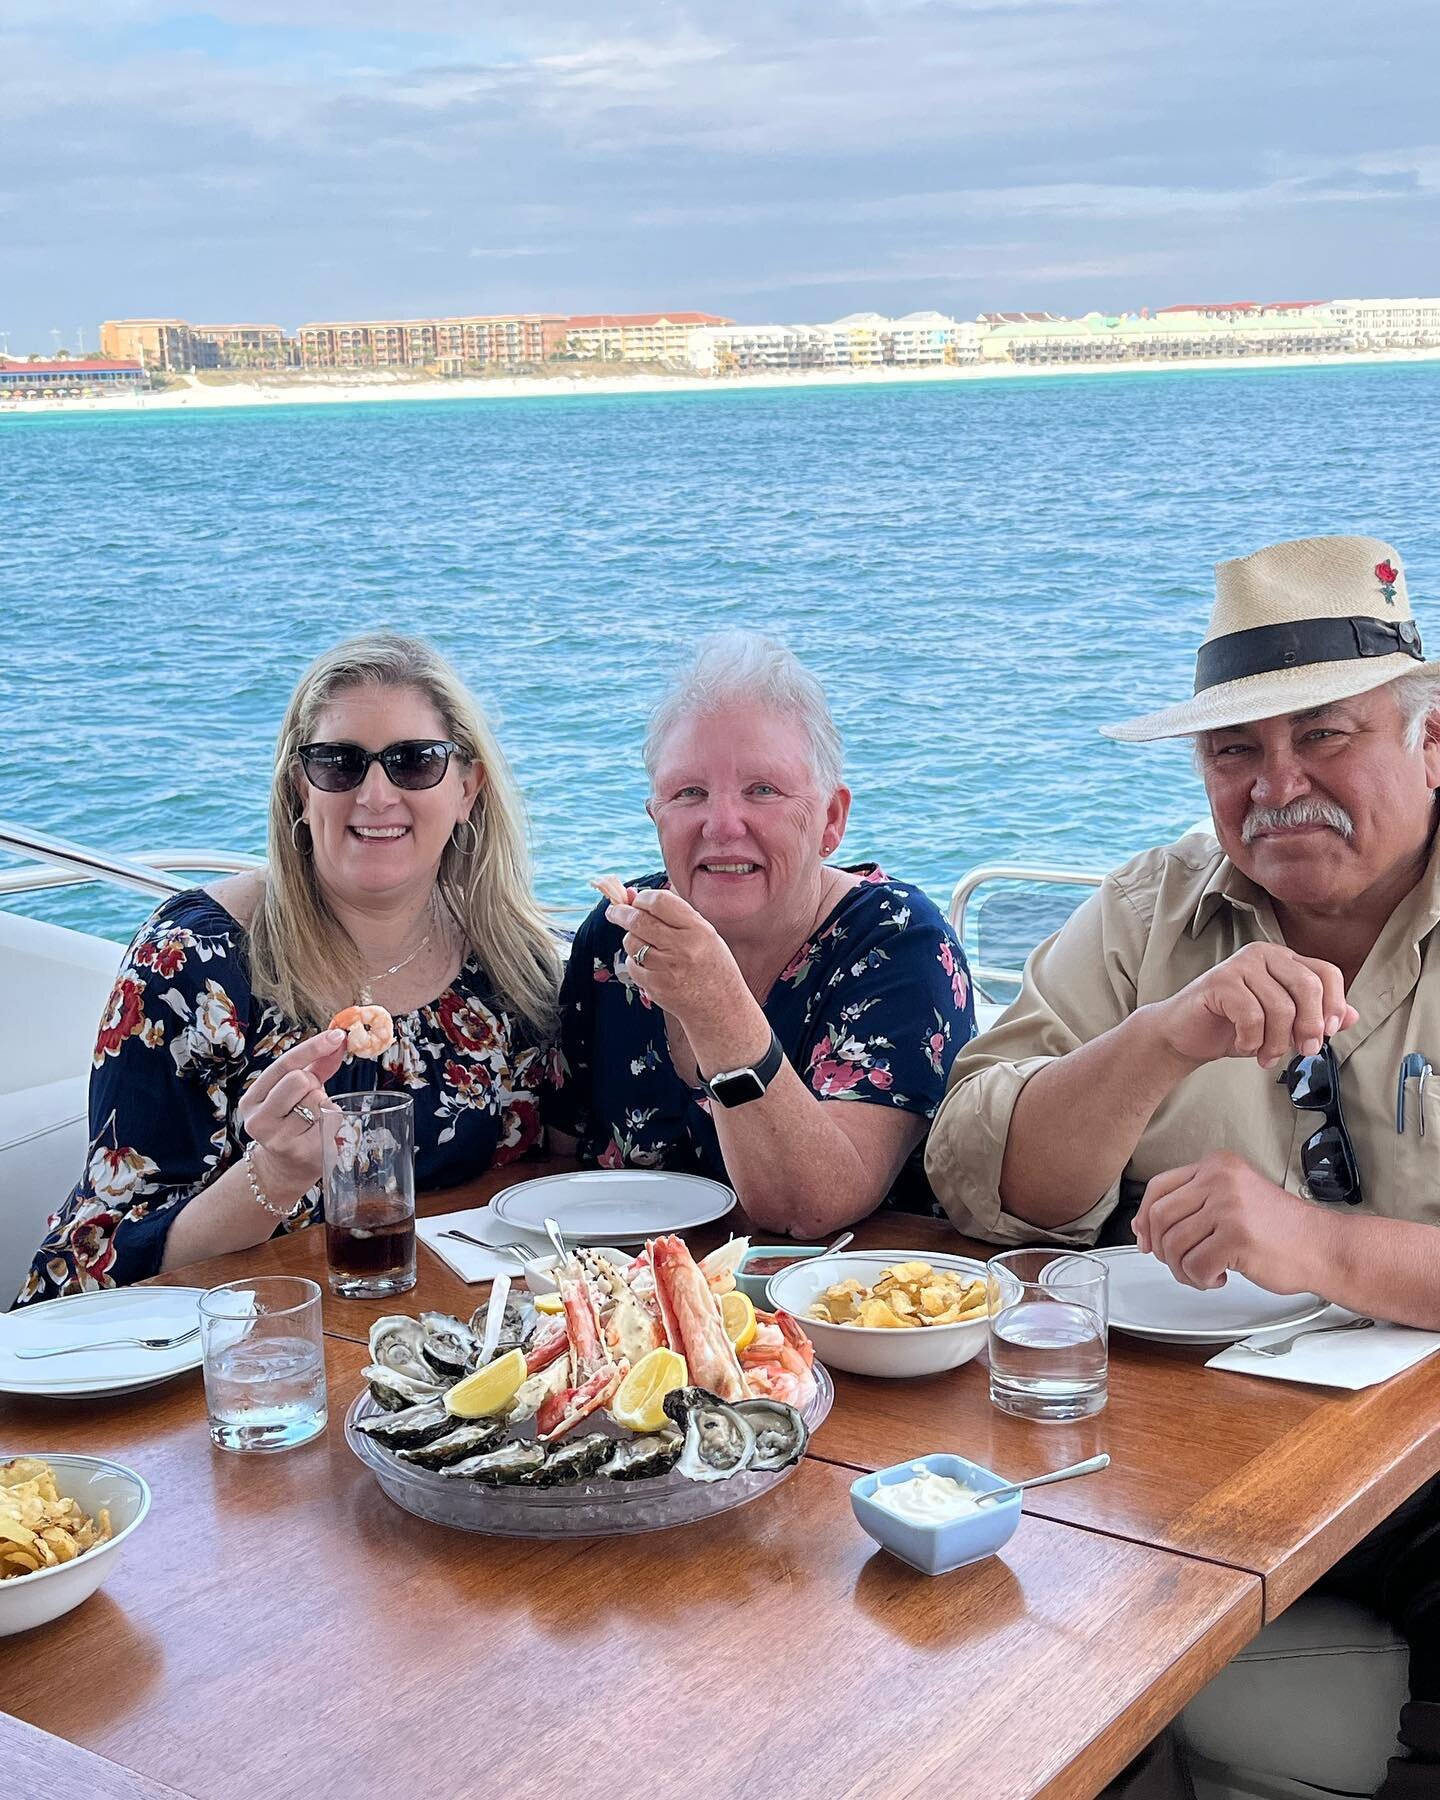 It was a beautiful day for a seafood tower &amp; some @opusonewinery onboard @hollowayyachts . The best food, the best wine, &amp; the best yacht charter on the harbor. When @hollowayyachts &amp; @polishedchef get together, you can expect nothing sho